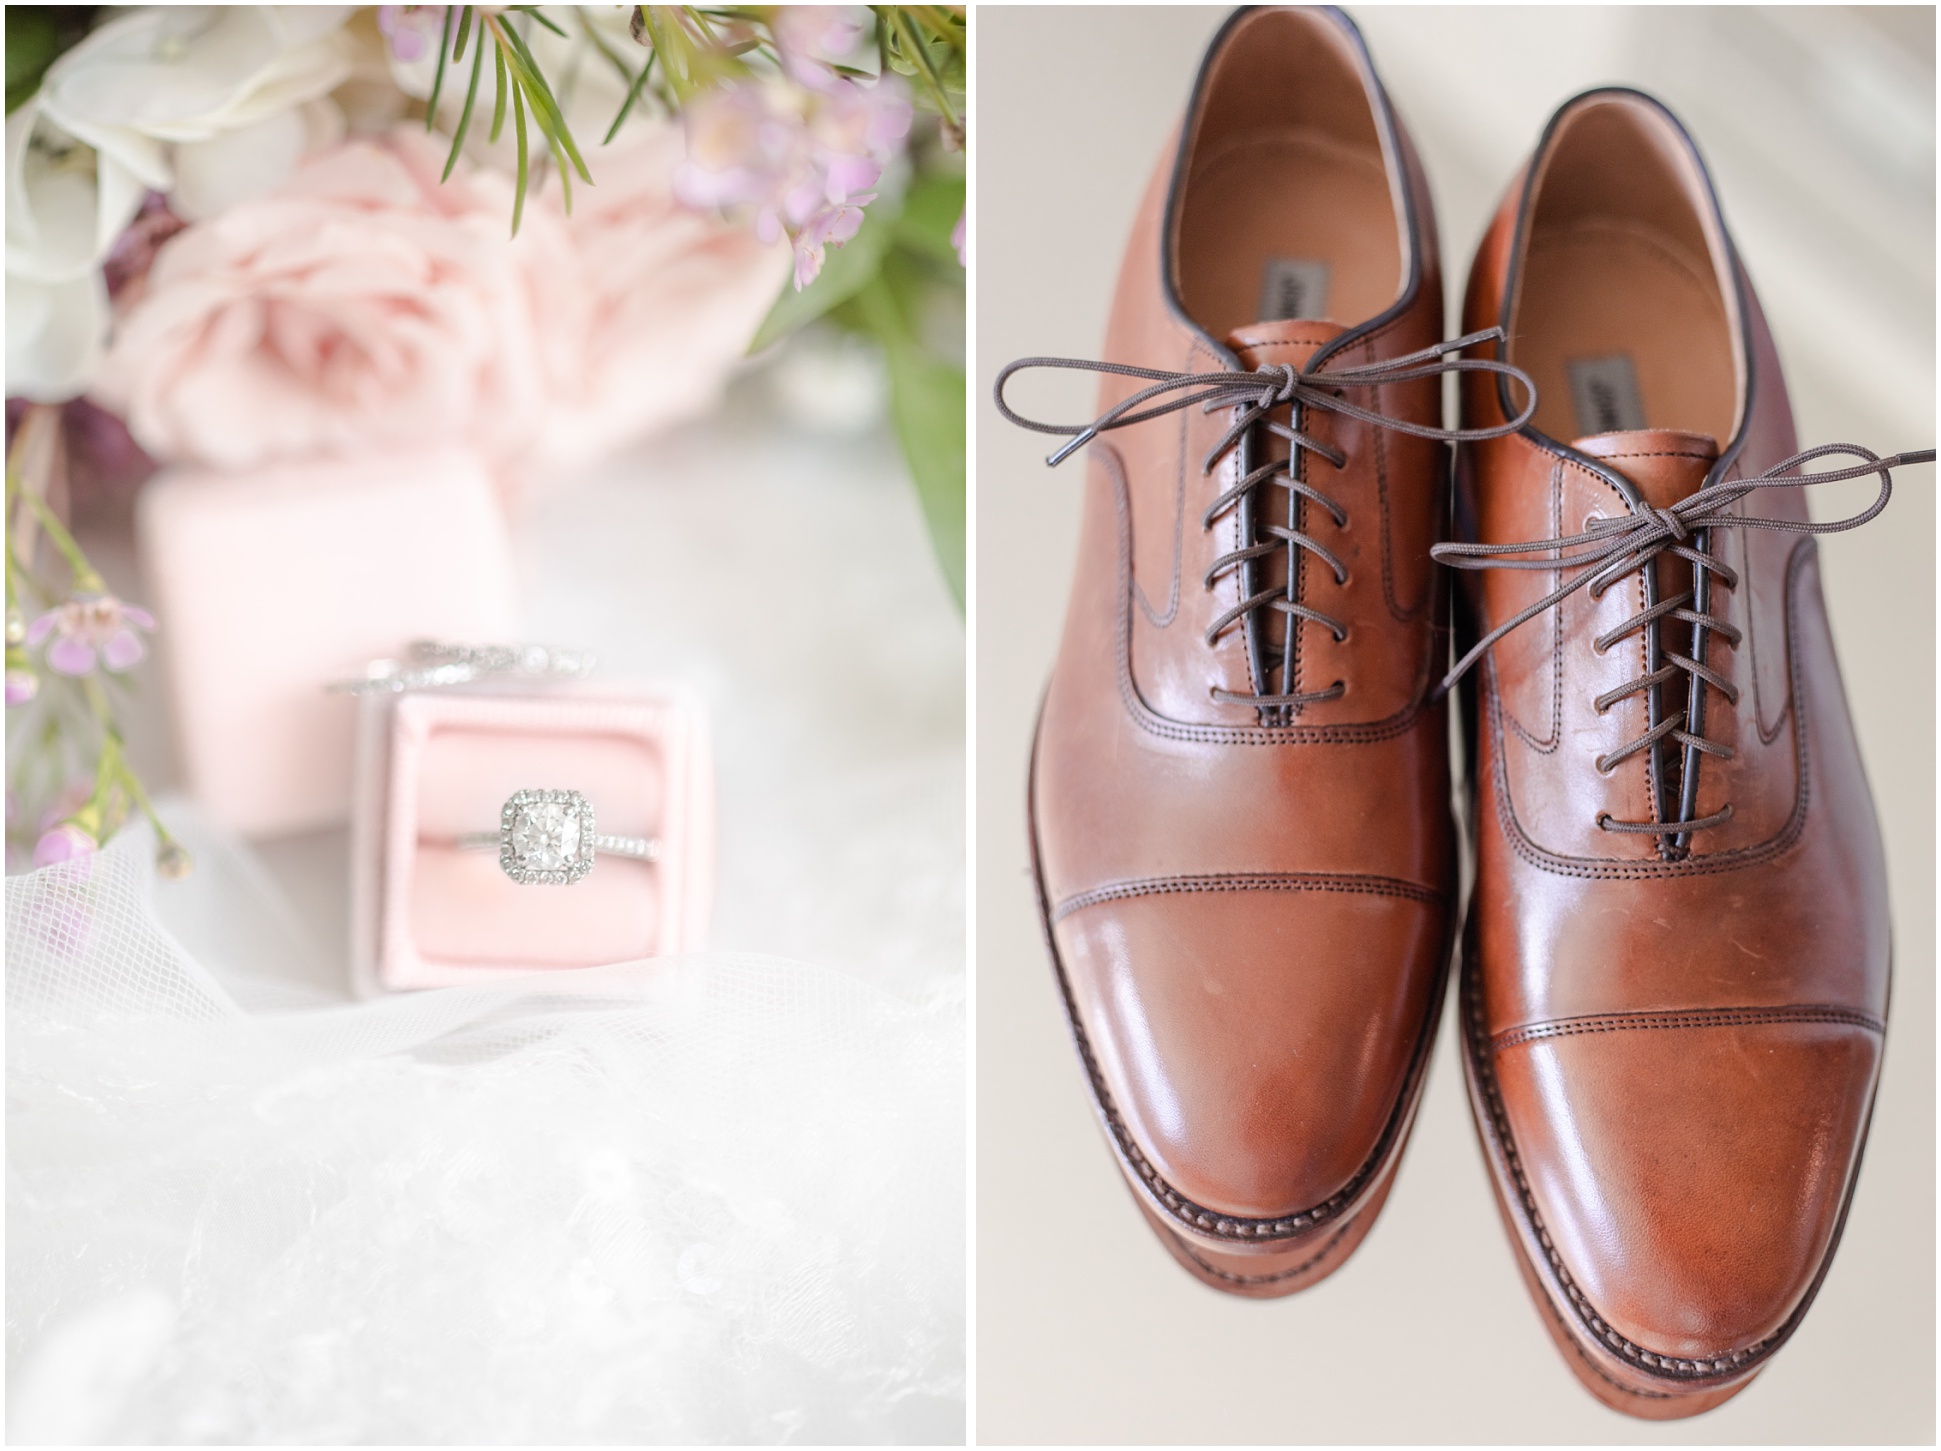 Square diamond wedding rings in blush Mrs. Box and the grooms shoes on a mirror